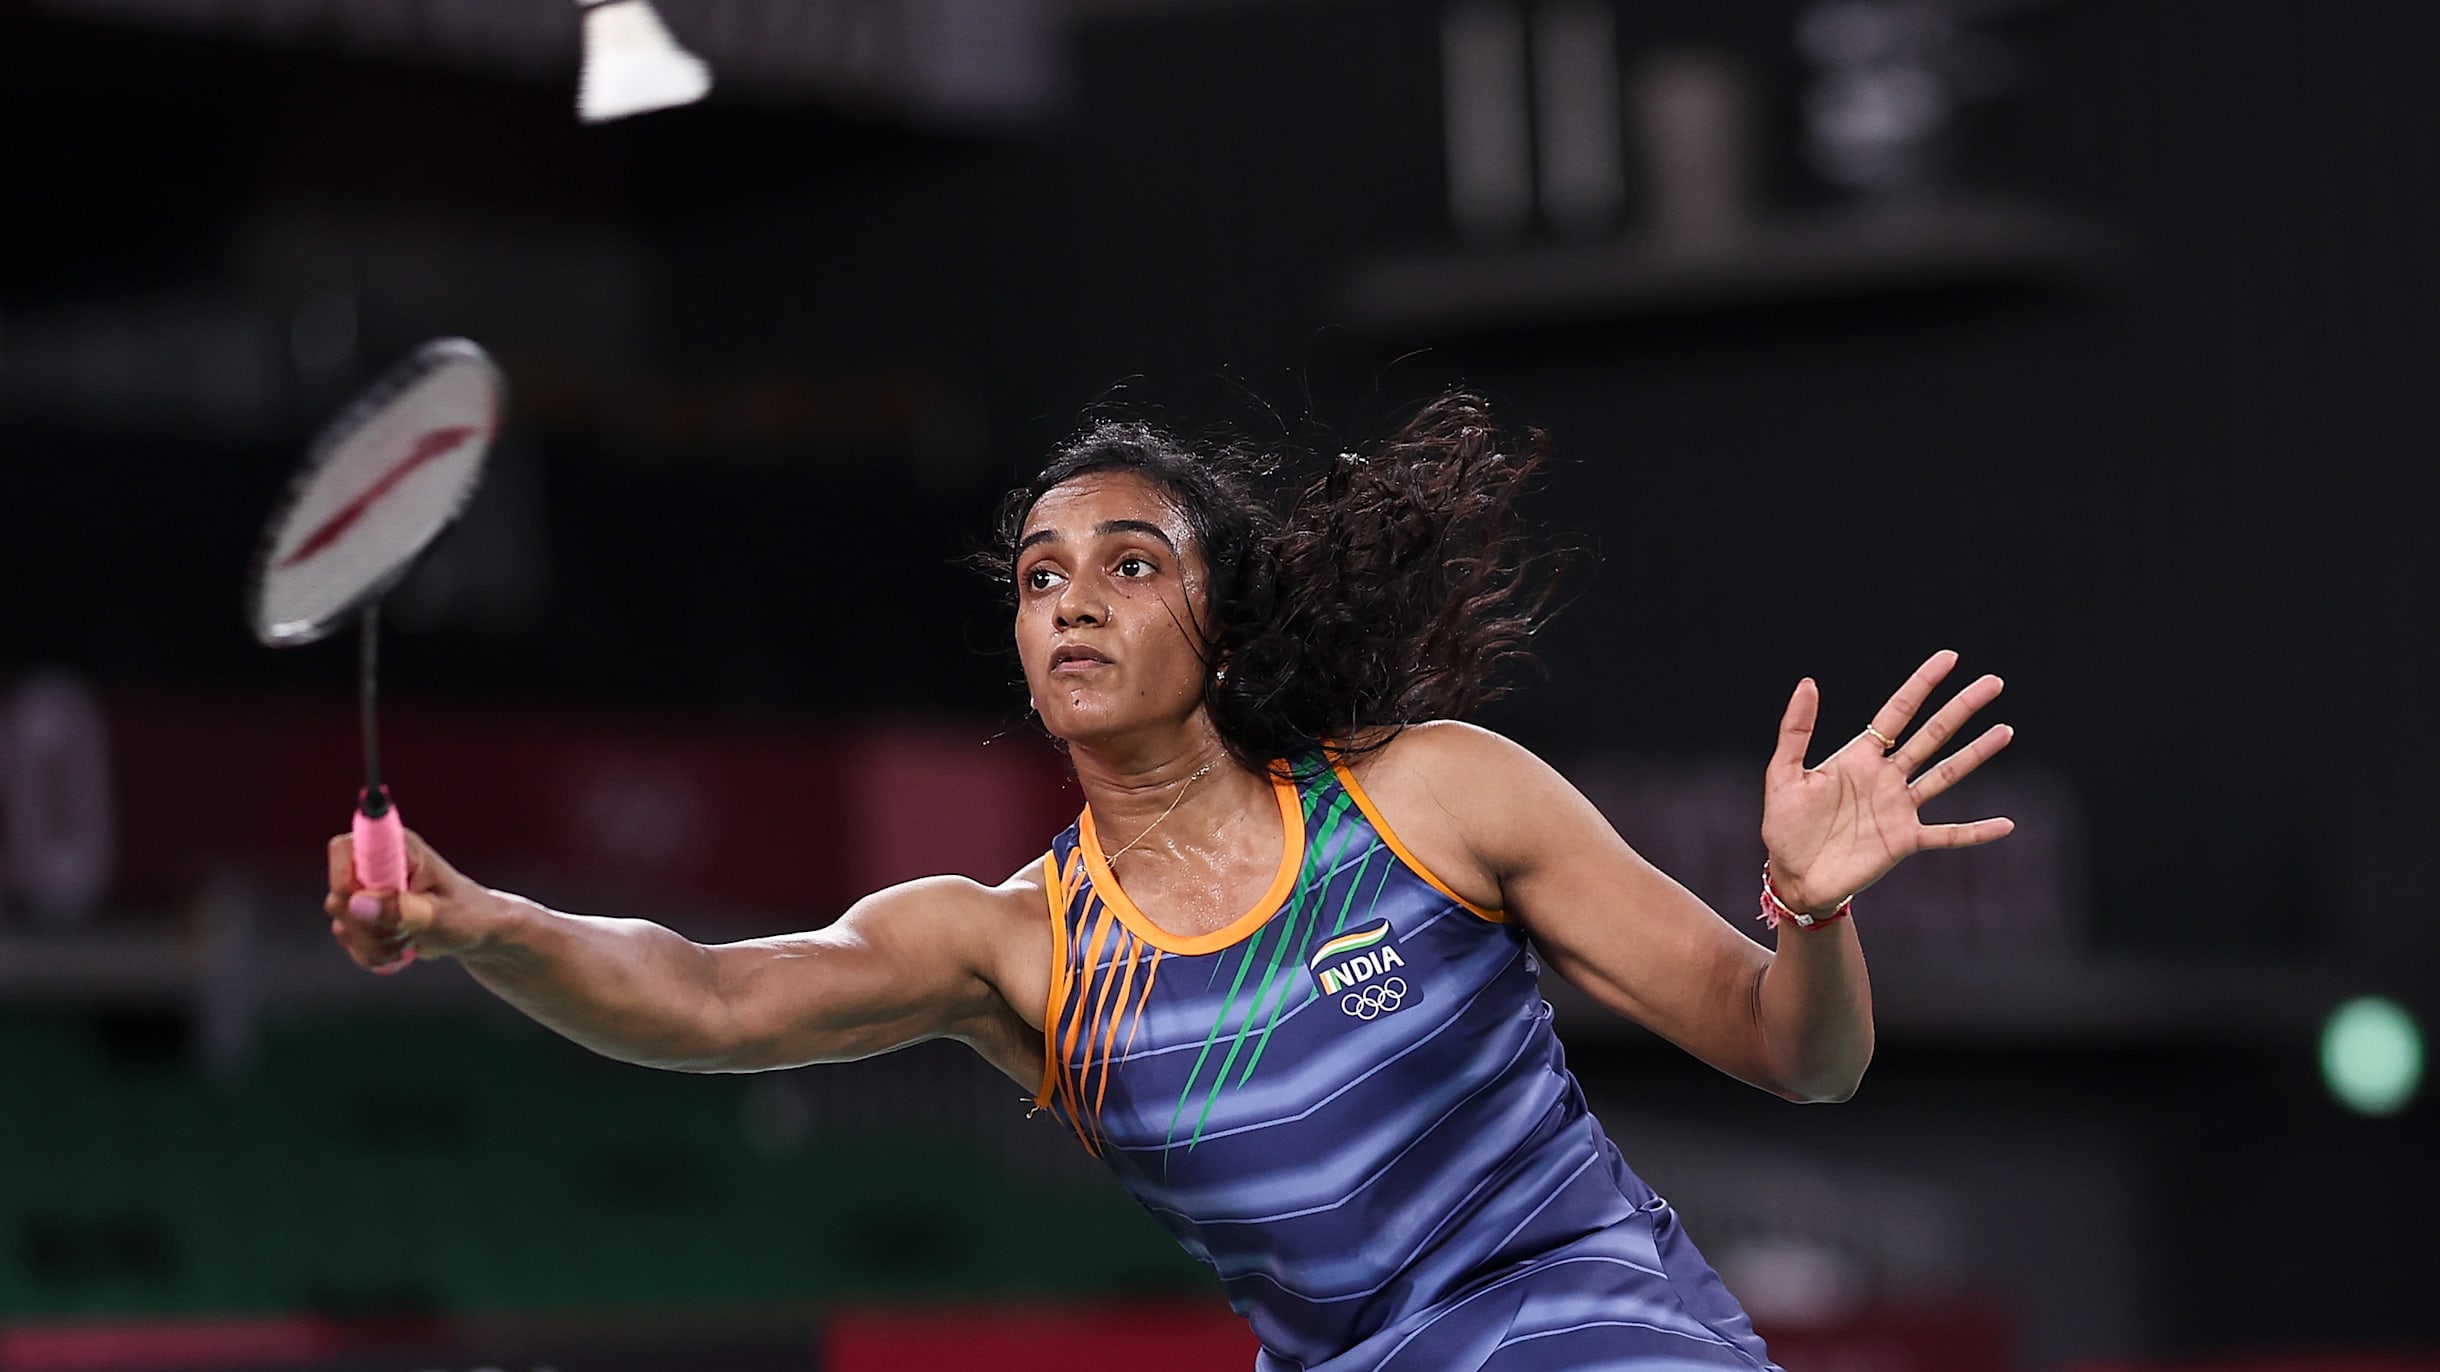 Australian Open 2023 badminton PV Sindhu marches into second round